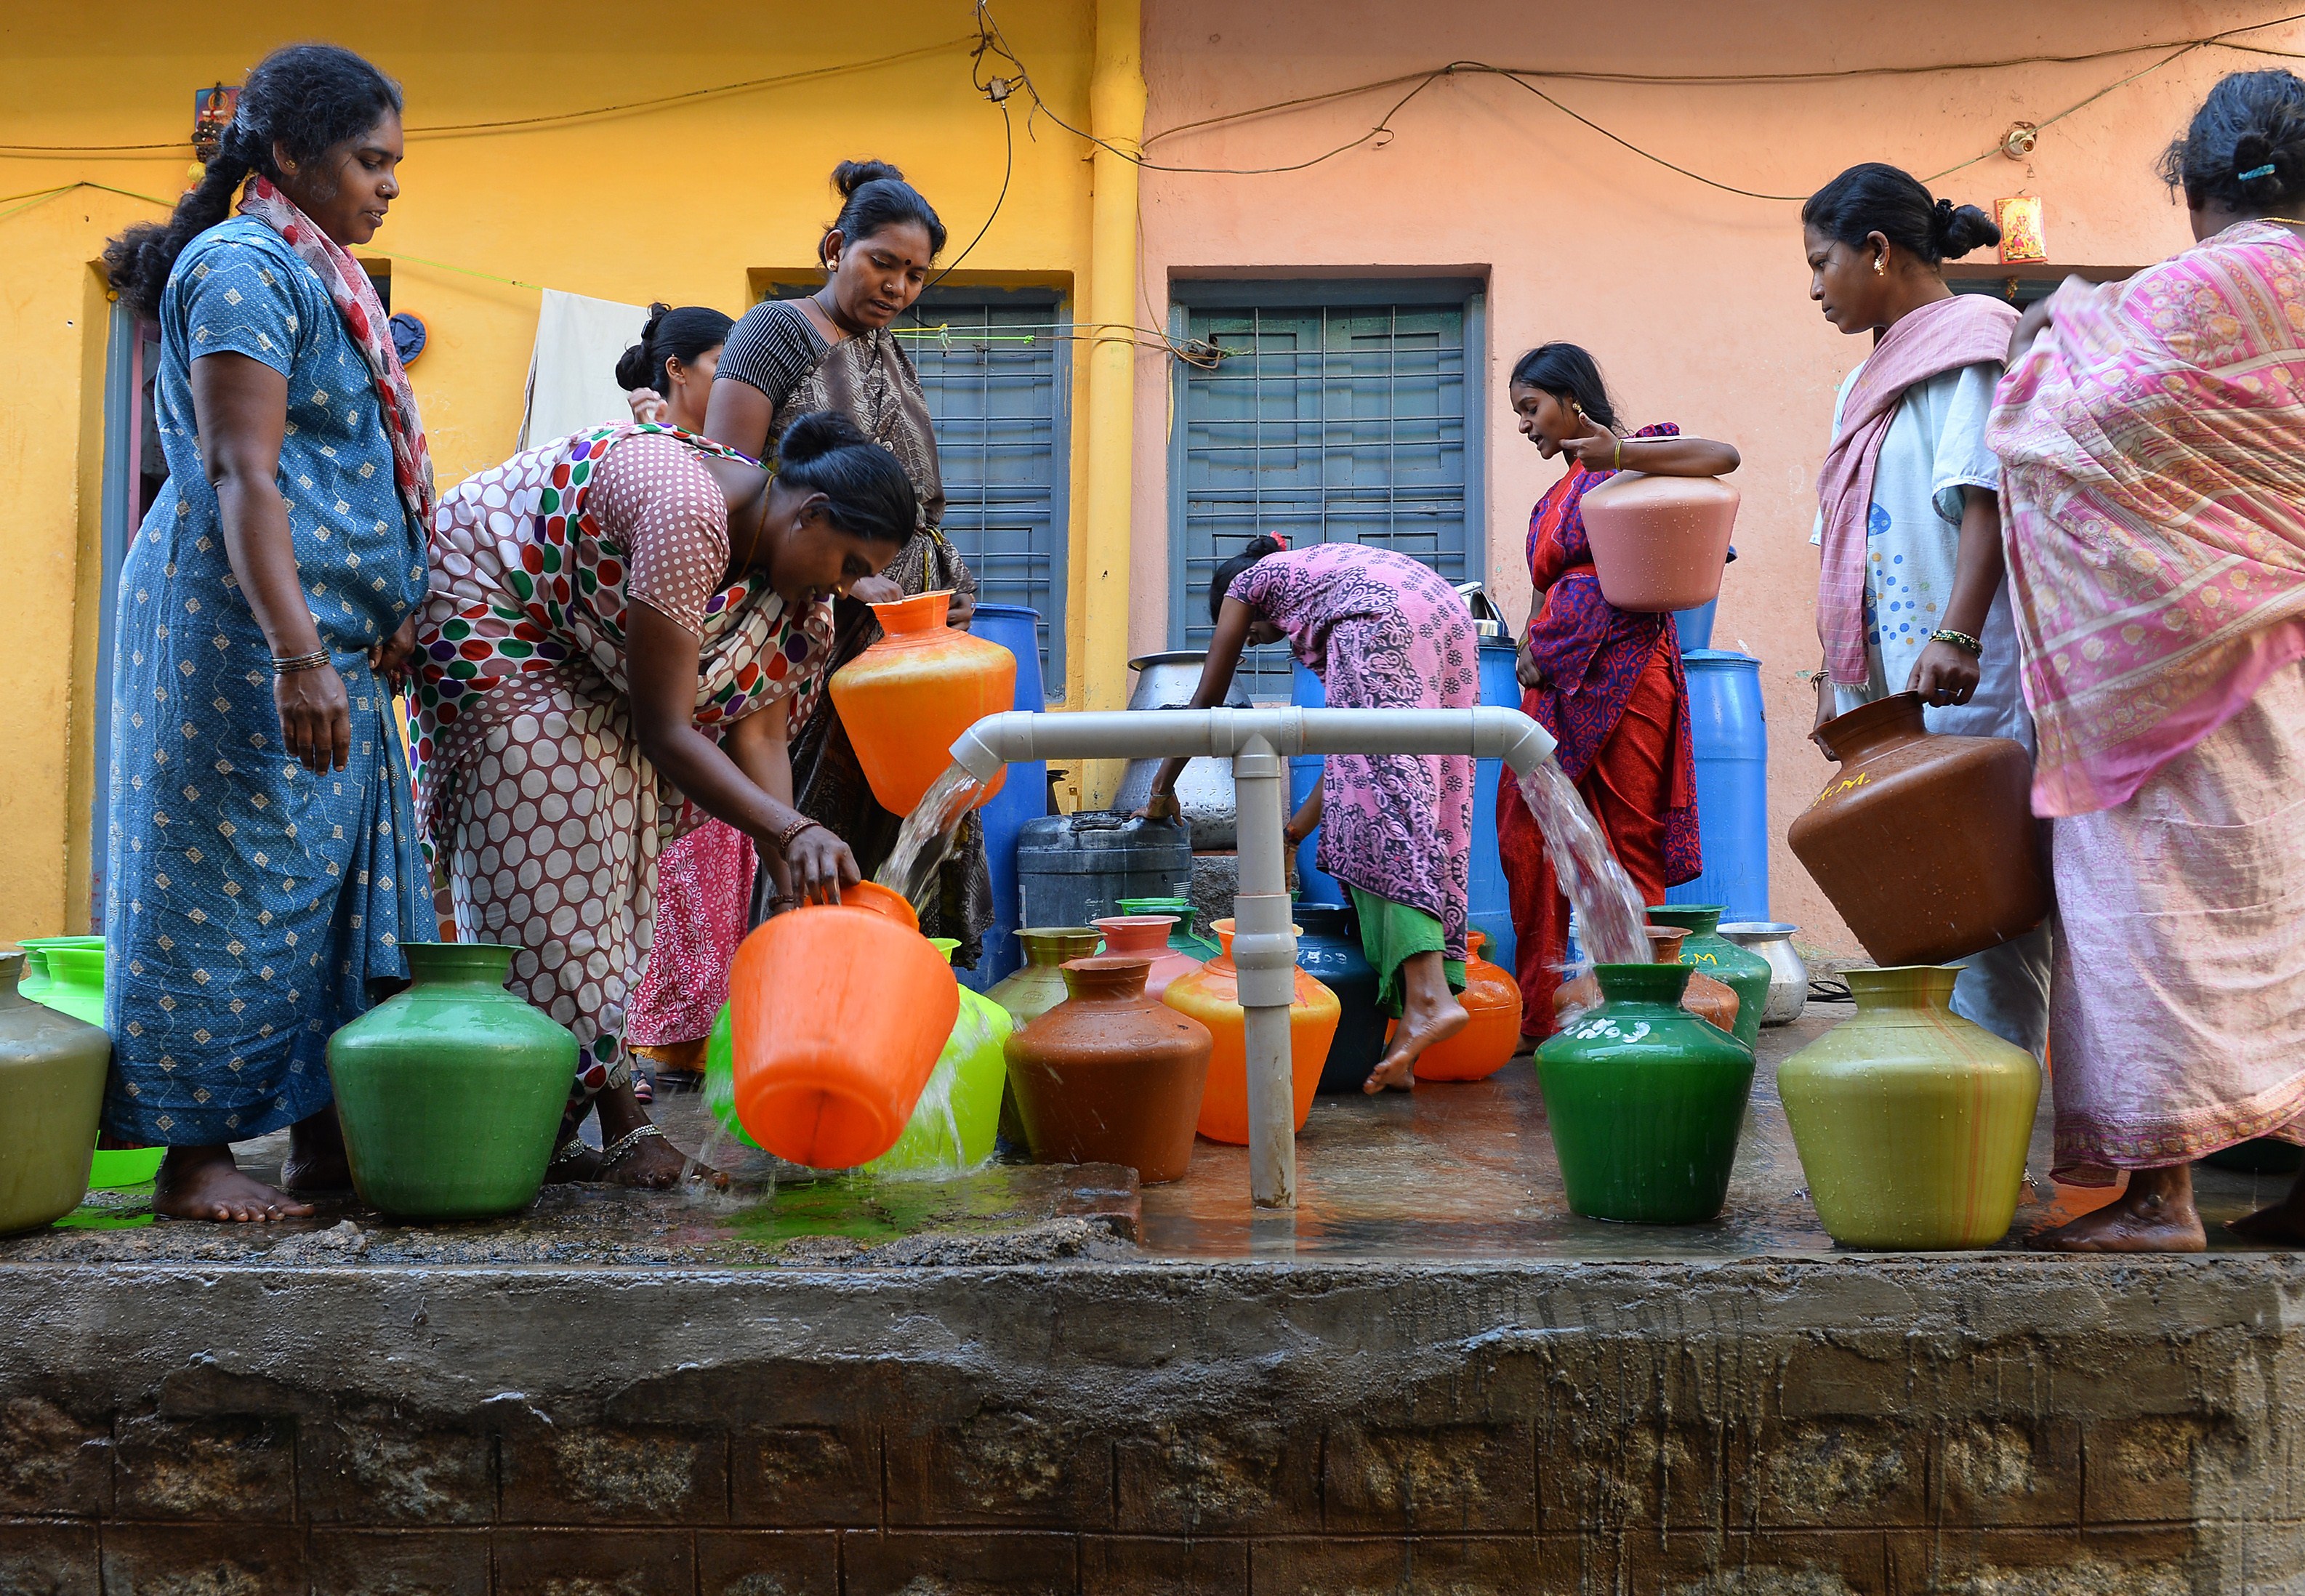 Residents in Bangalore wait to collect drinking water in plastic pots for their households on March 18, 2015. (Manjunath Kiran&mdash;AFP/Getty Images)